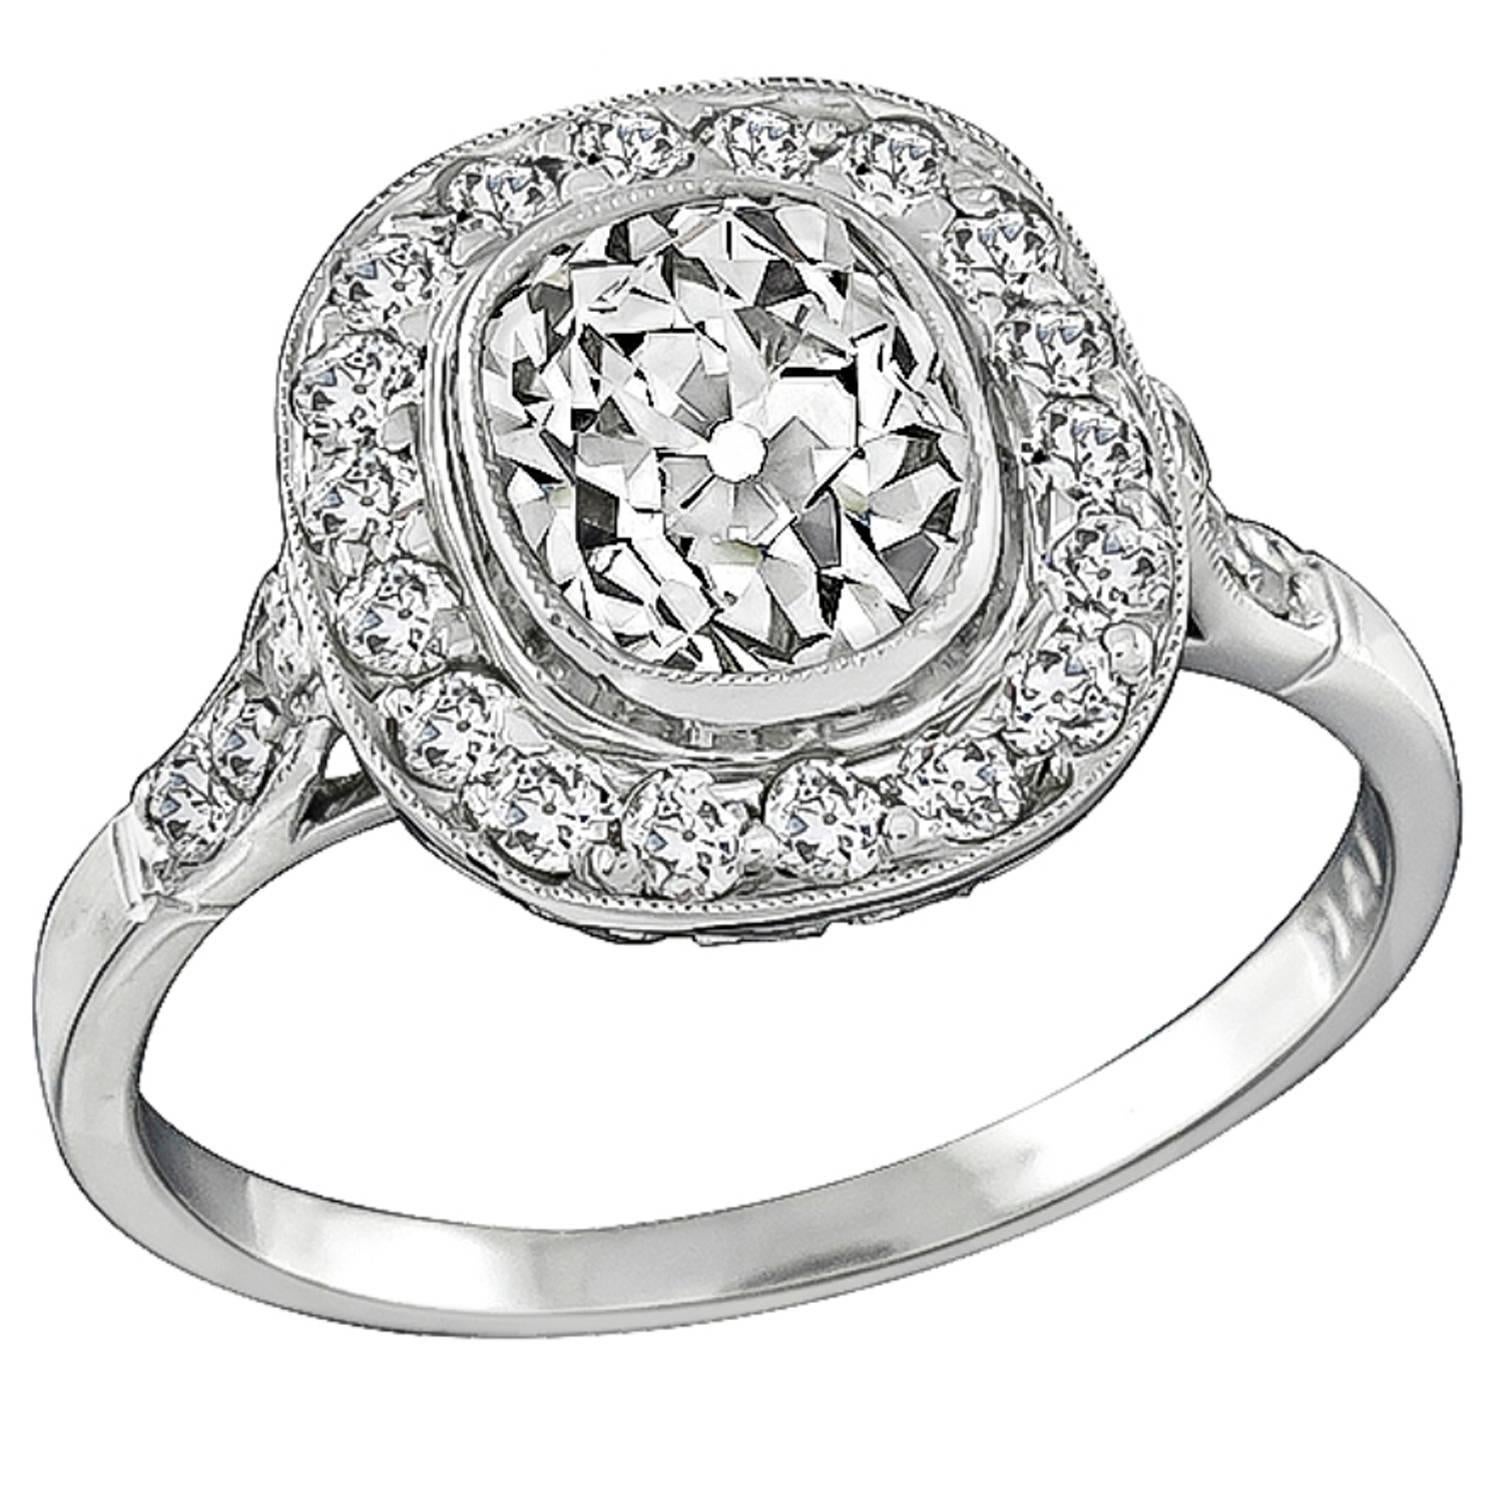 1.45 Carat GIA Certified Old Mine Cut Diamond Platinum Halo Engagement Ring For Sale